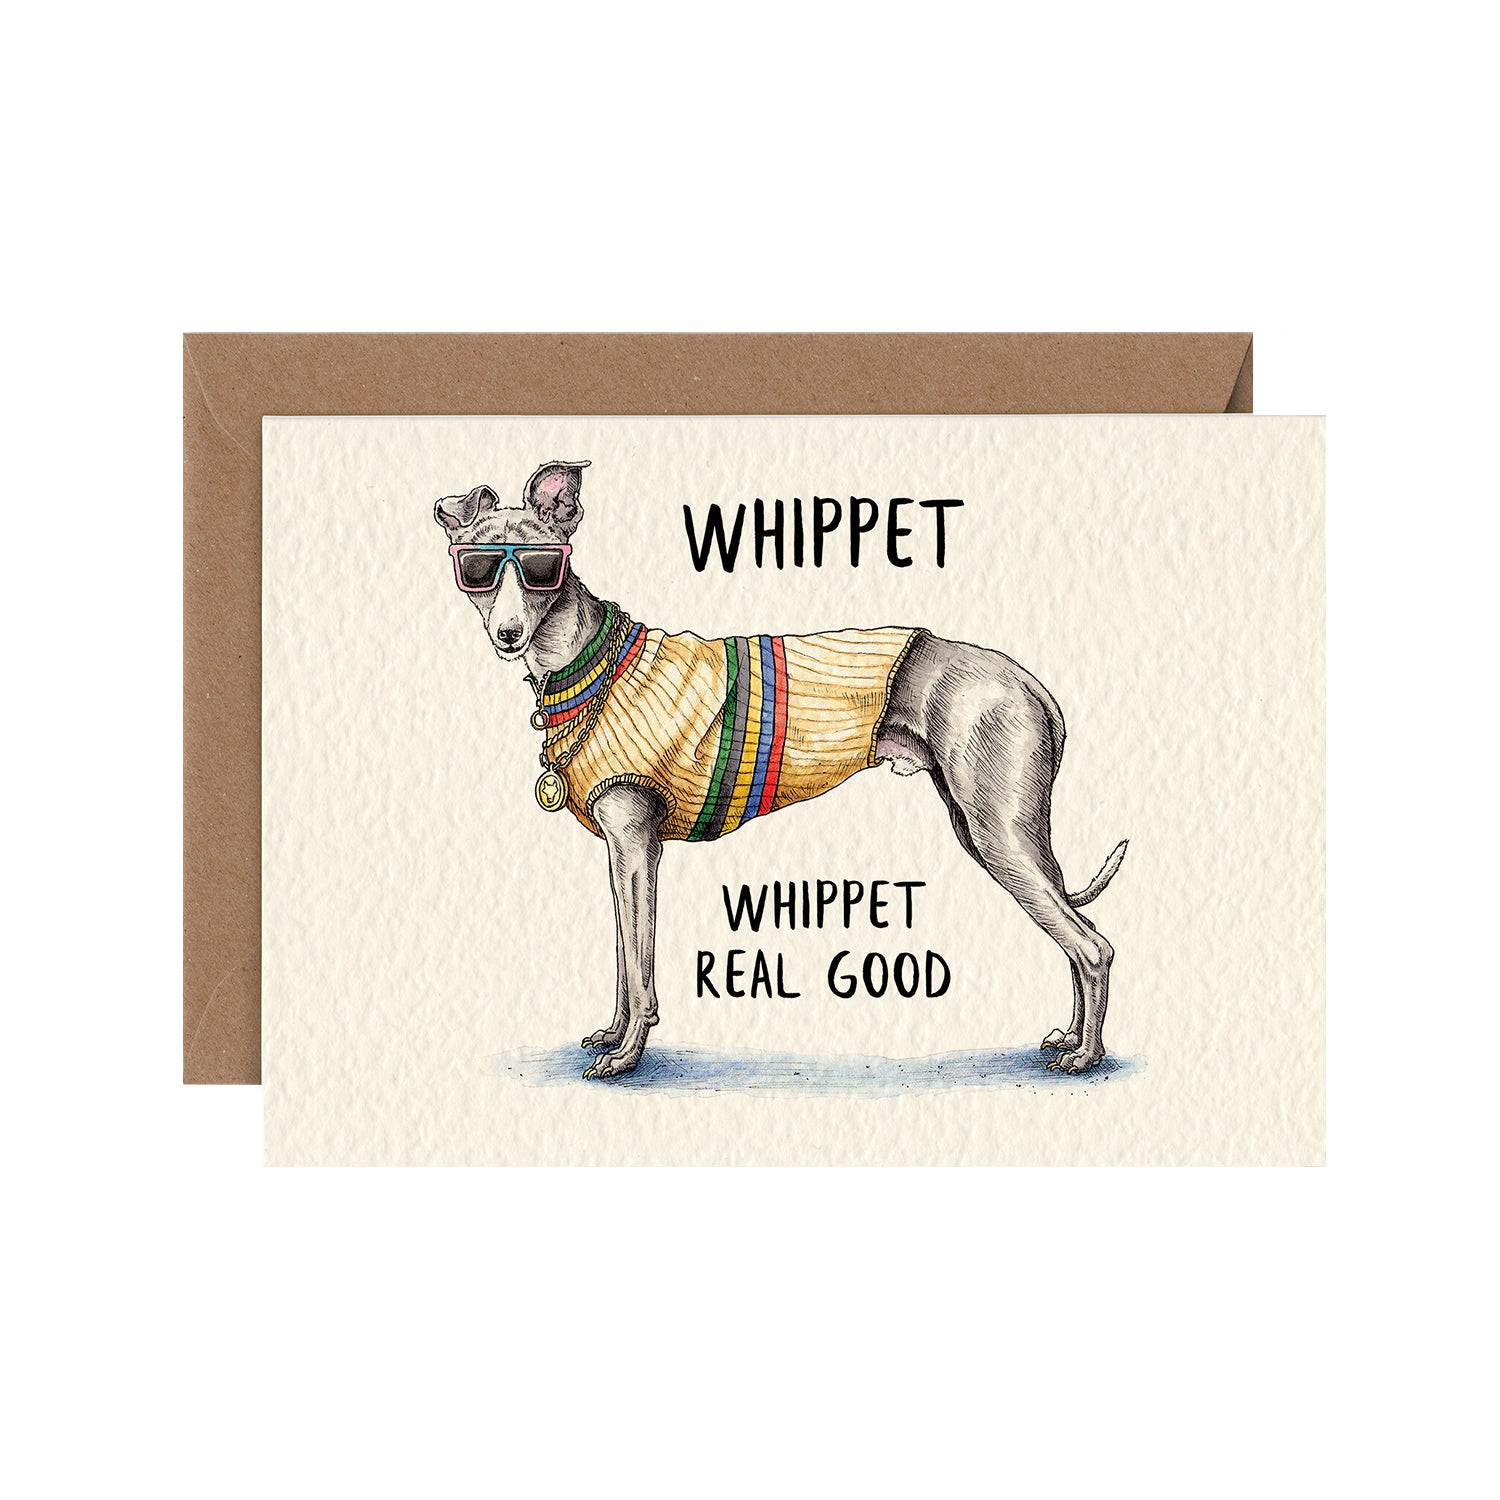 A retro-style Hester &amp; Cook greeting card featuring a Whippet wearing a sweater, saying &quot;whippet&quot; real good.